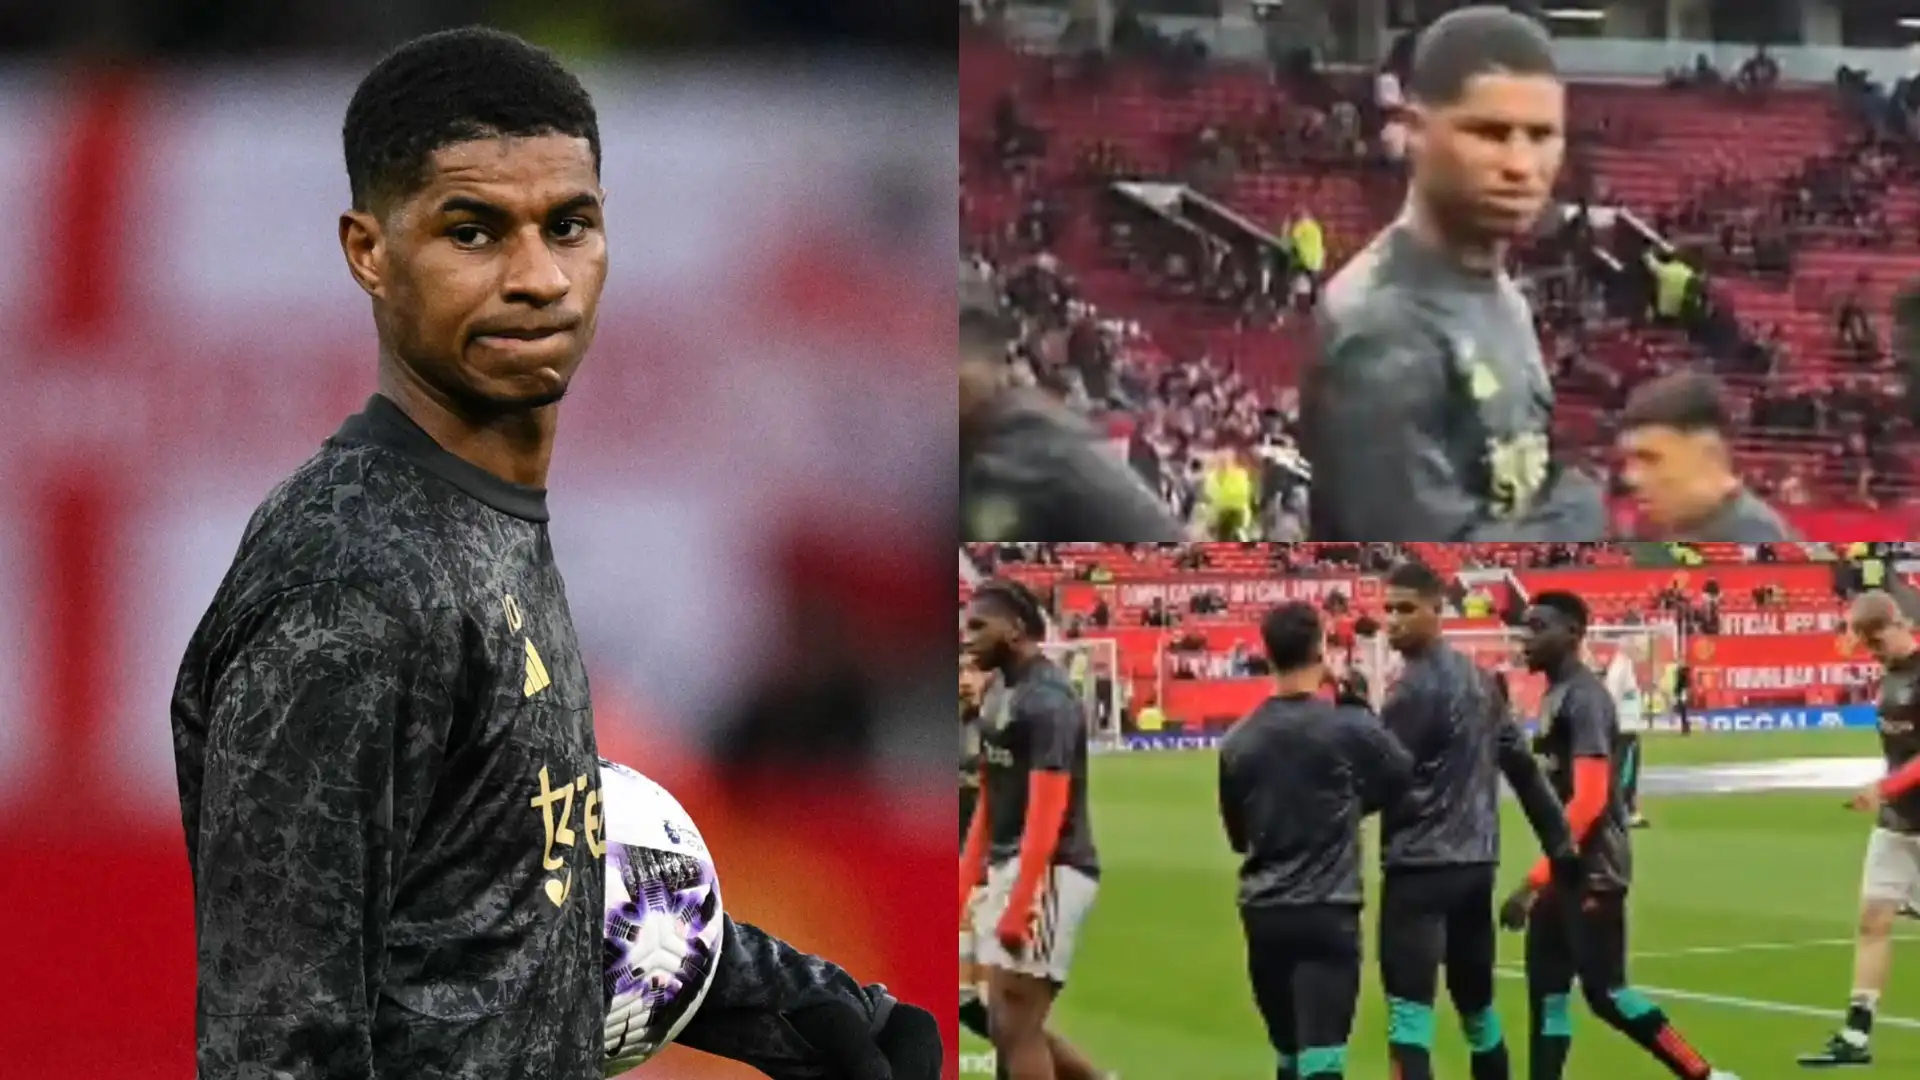 VIDEO: Marcus Rashford is fuming! Struggling Man Utd forward restrained after angrily confronting fan at Old Trafford ahead of Newcastle clash